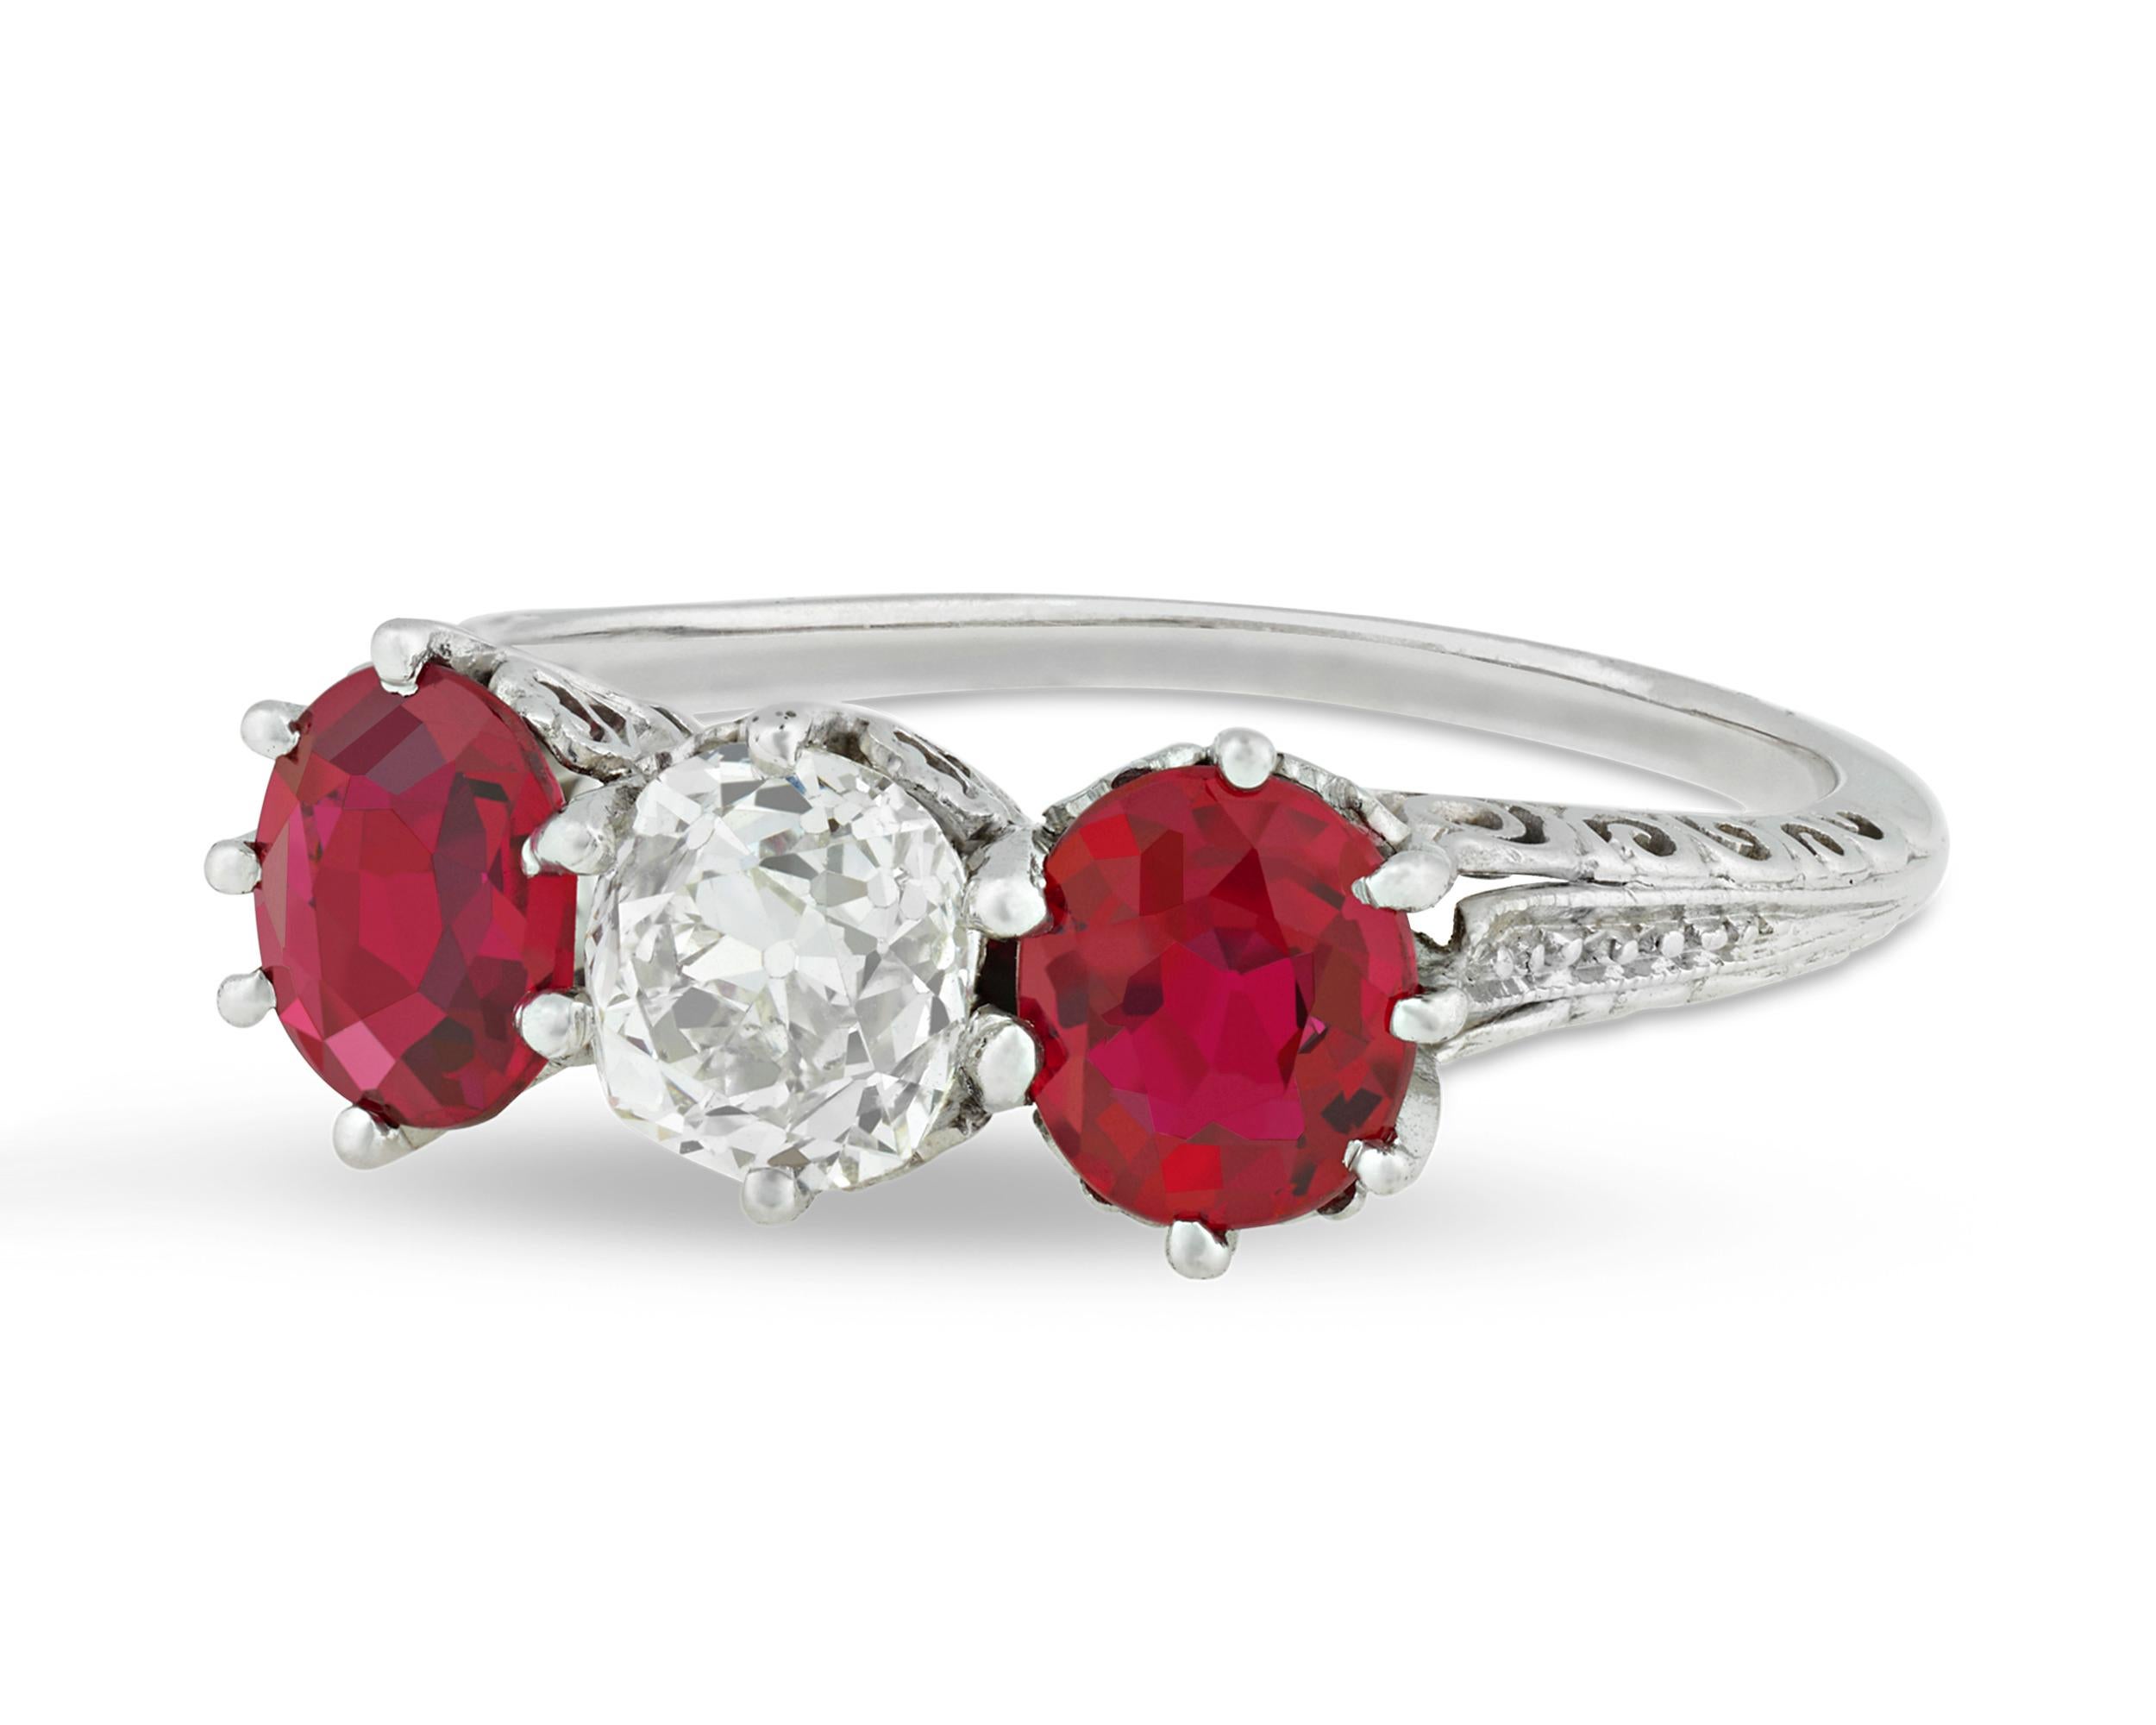 The beautiful Burma rubies in this classic three-stone ring radiate with the perfect 